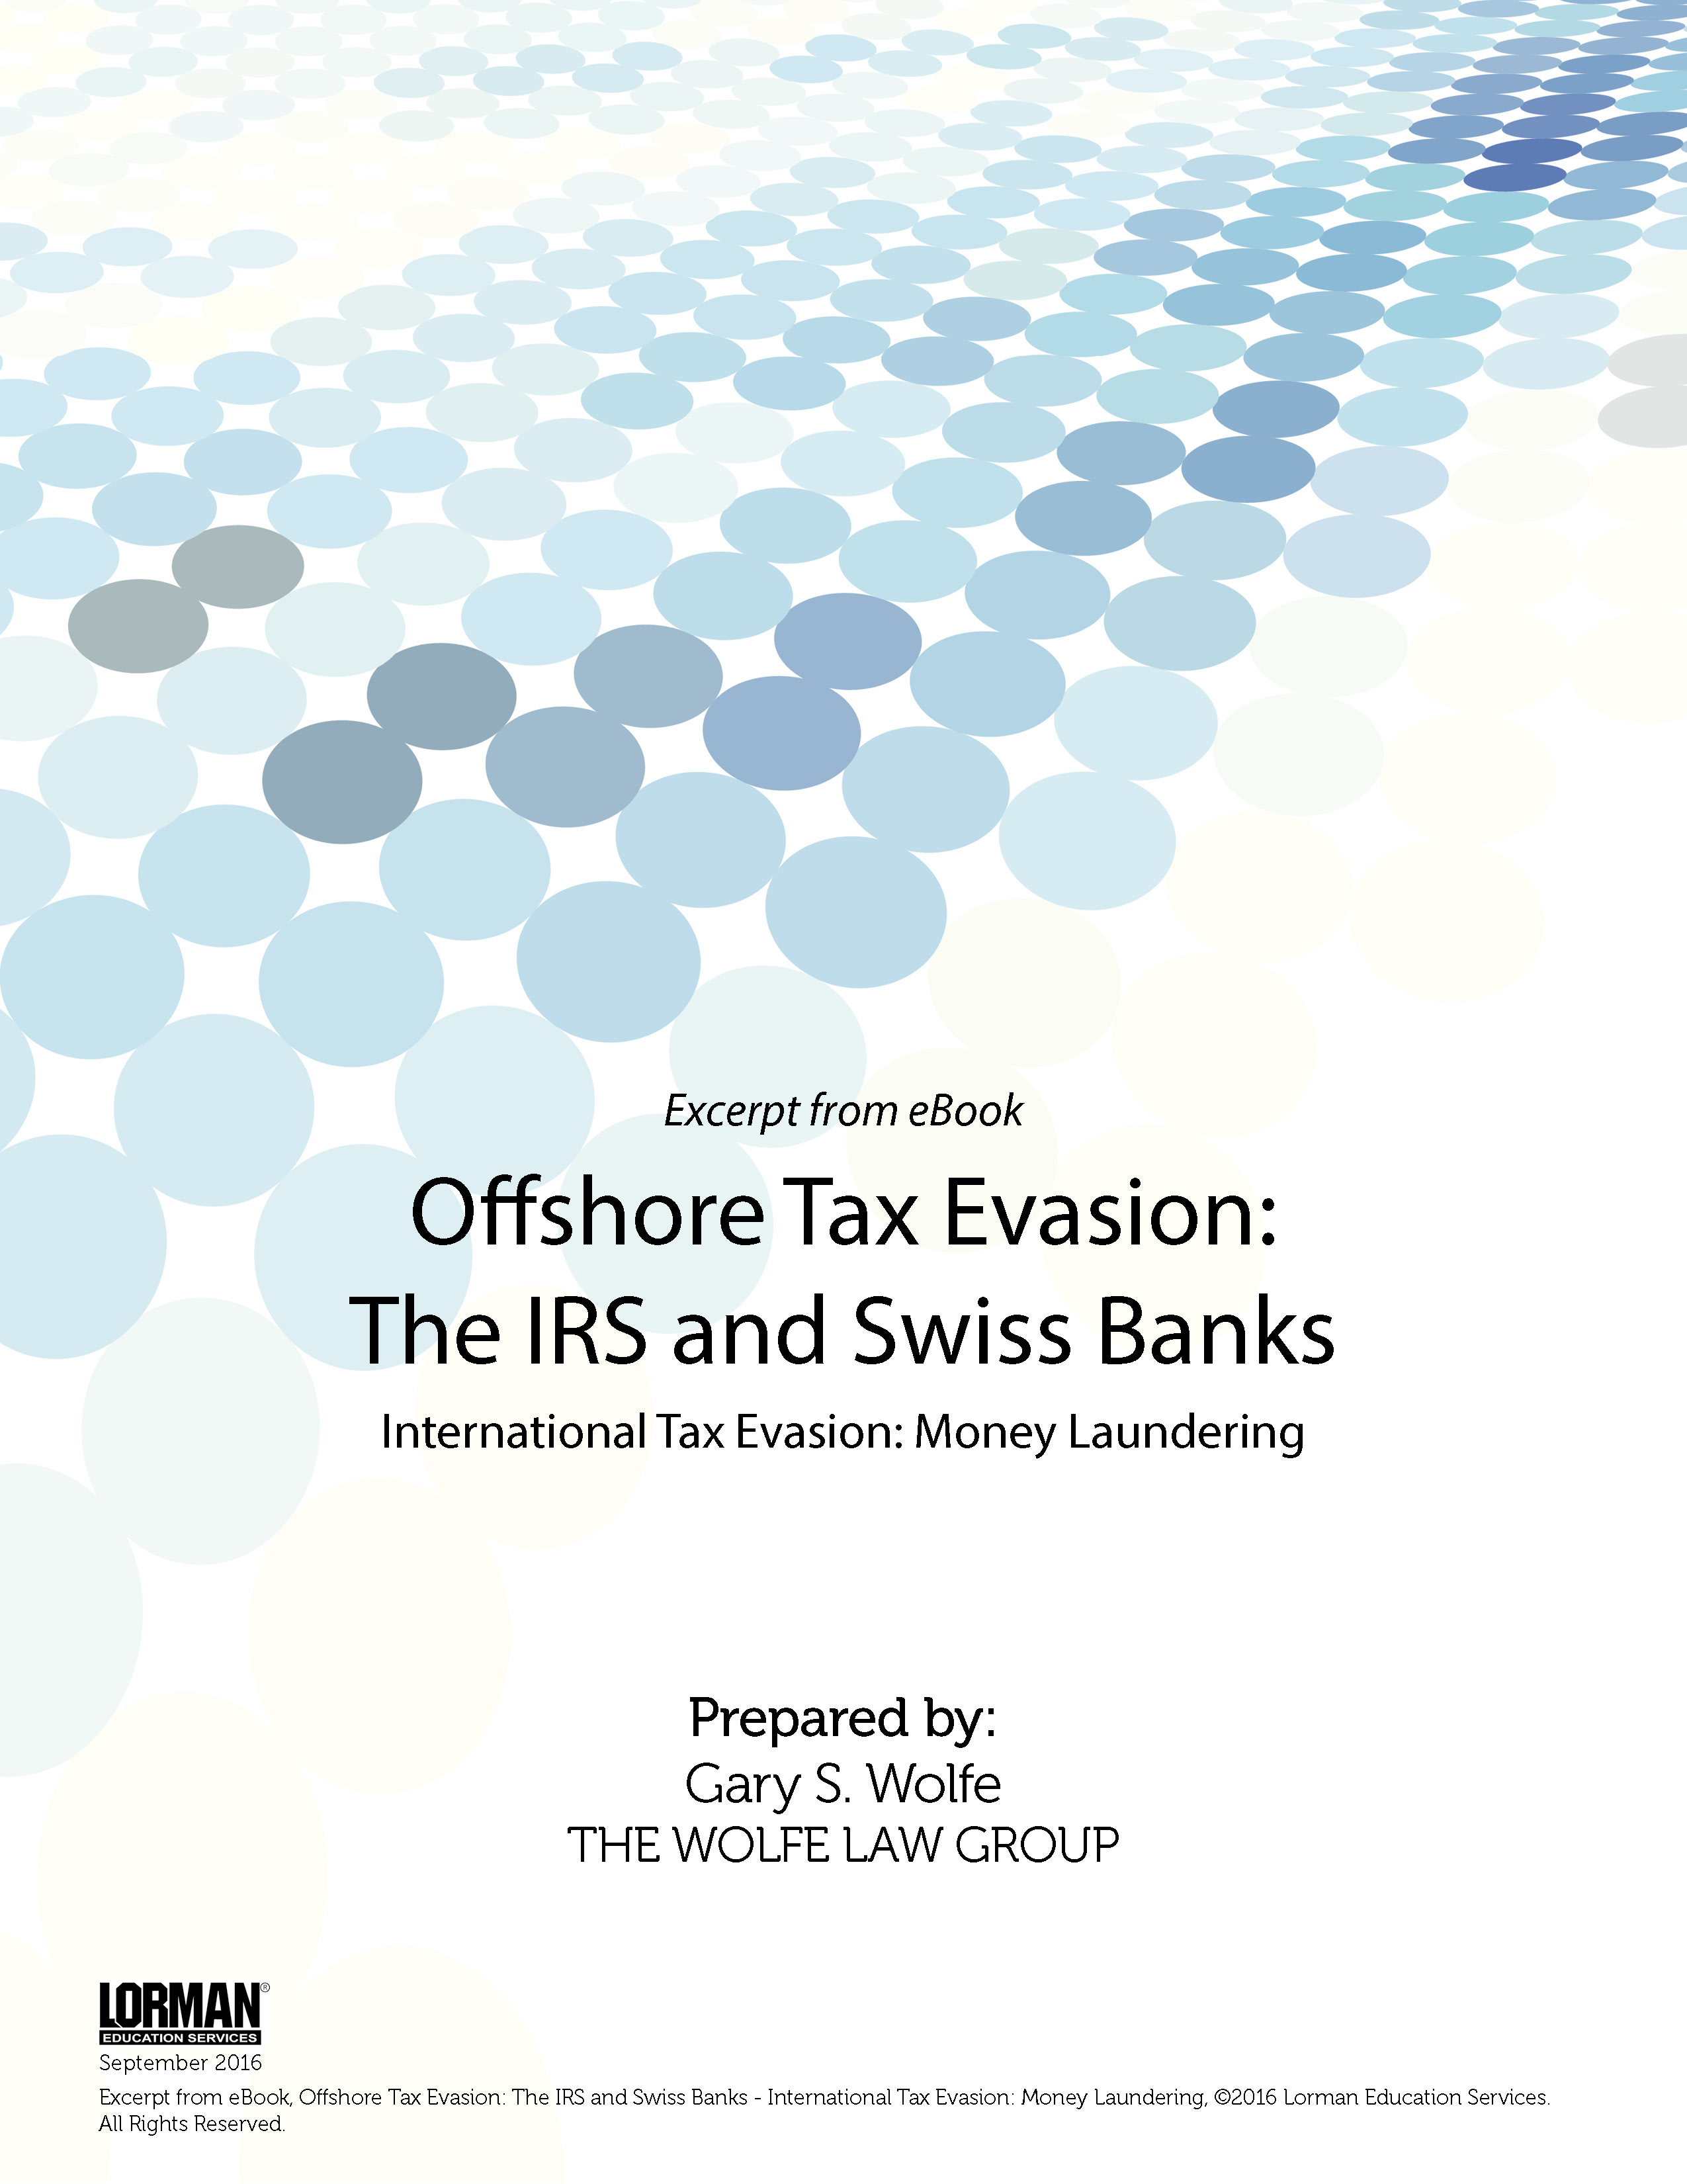 Offshore Tax Evasion: The IRS and Swiss Banks - International Tax Evasion: Money Laundering